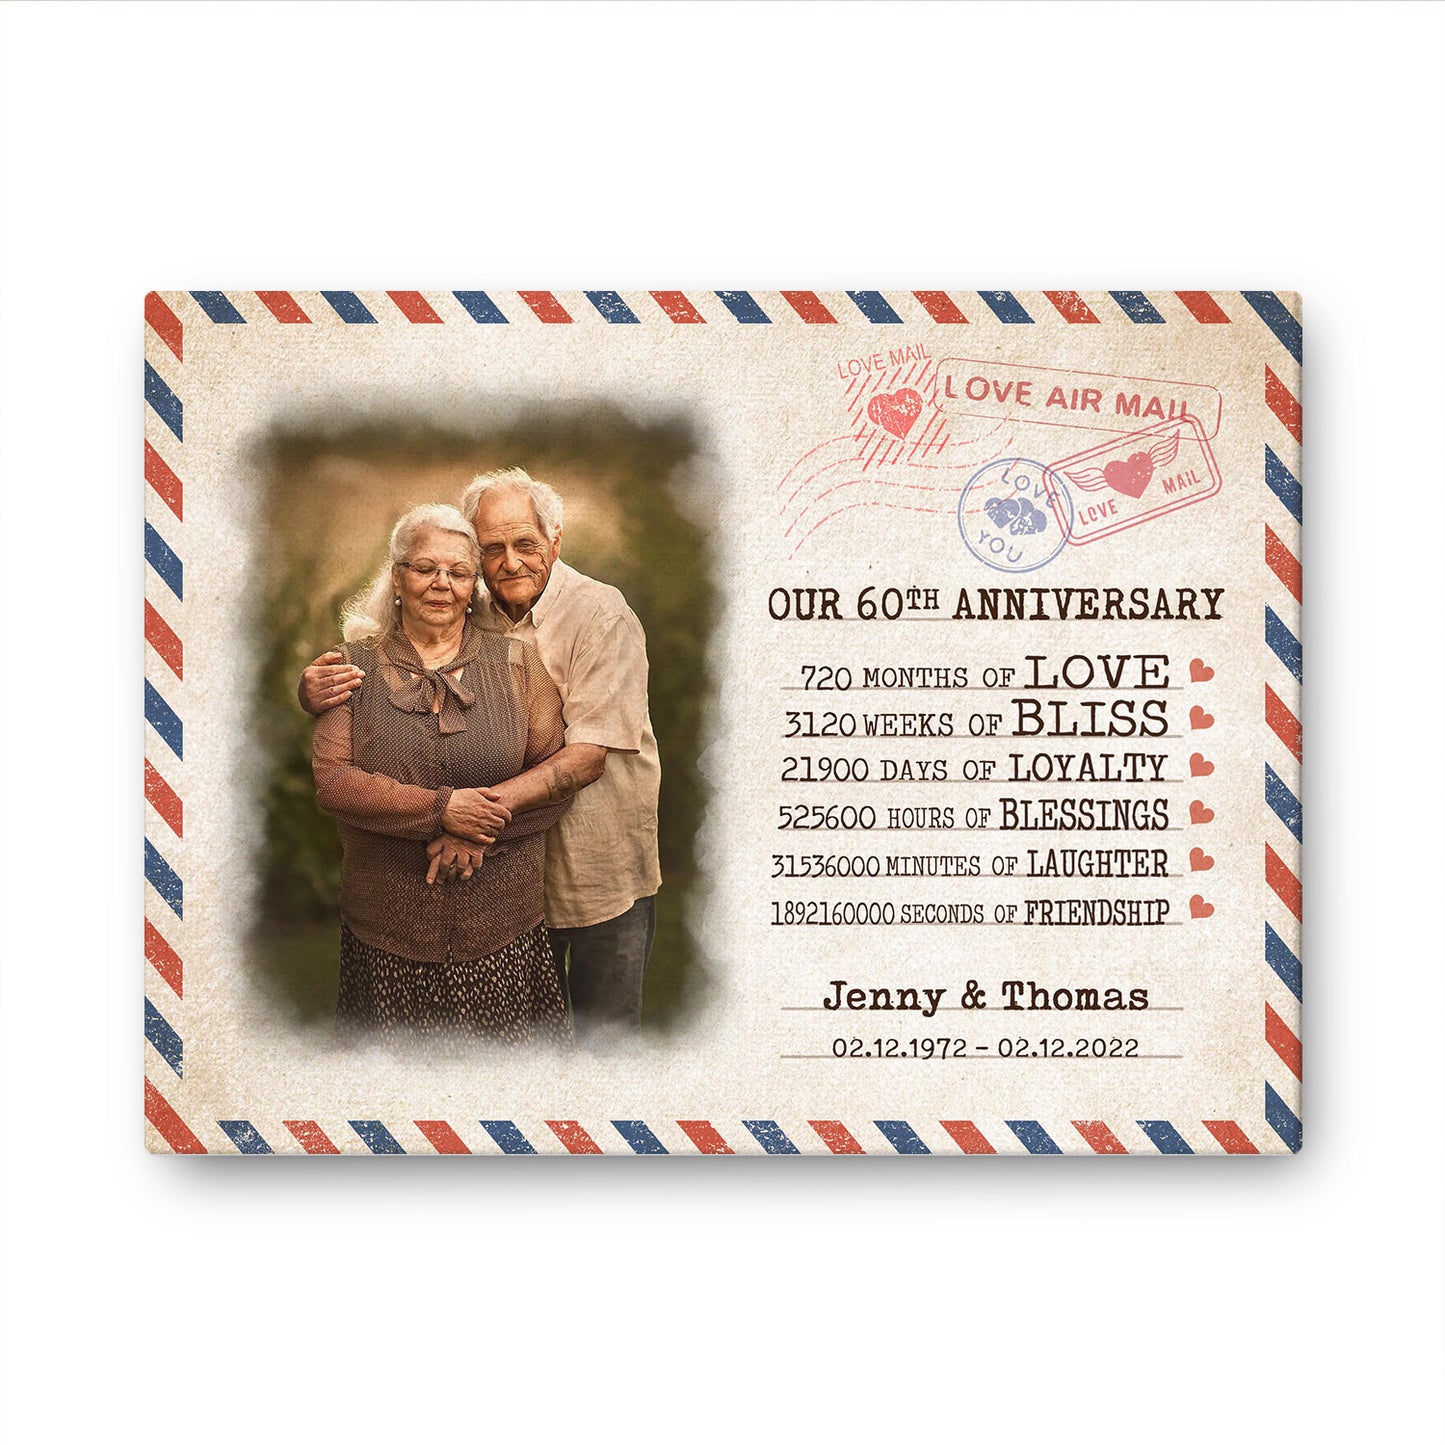 Our 60th Anniversary Letter Valentine Gift Personalized Canvas